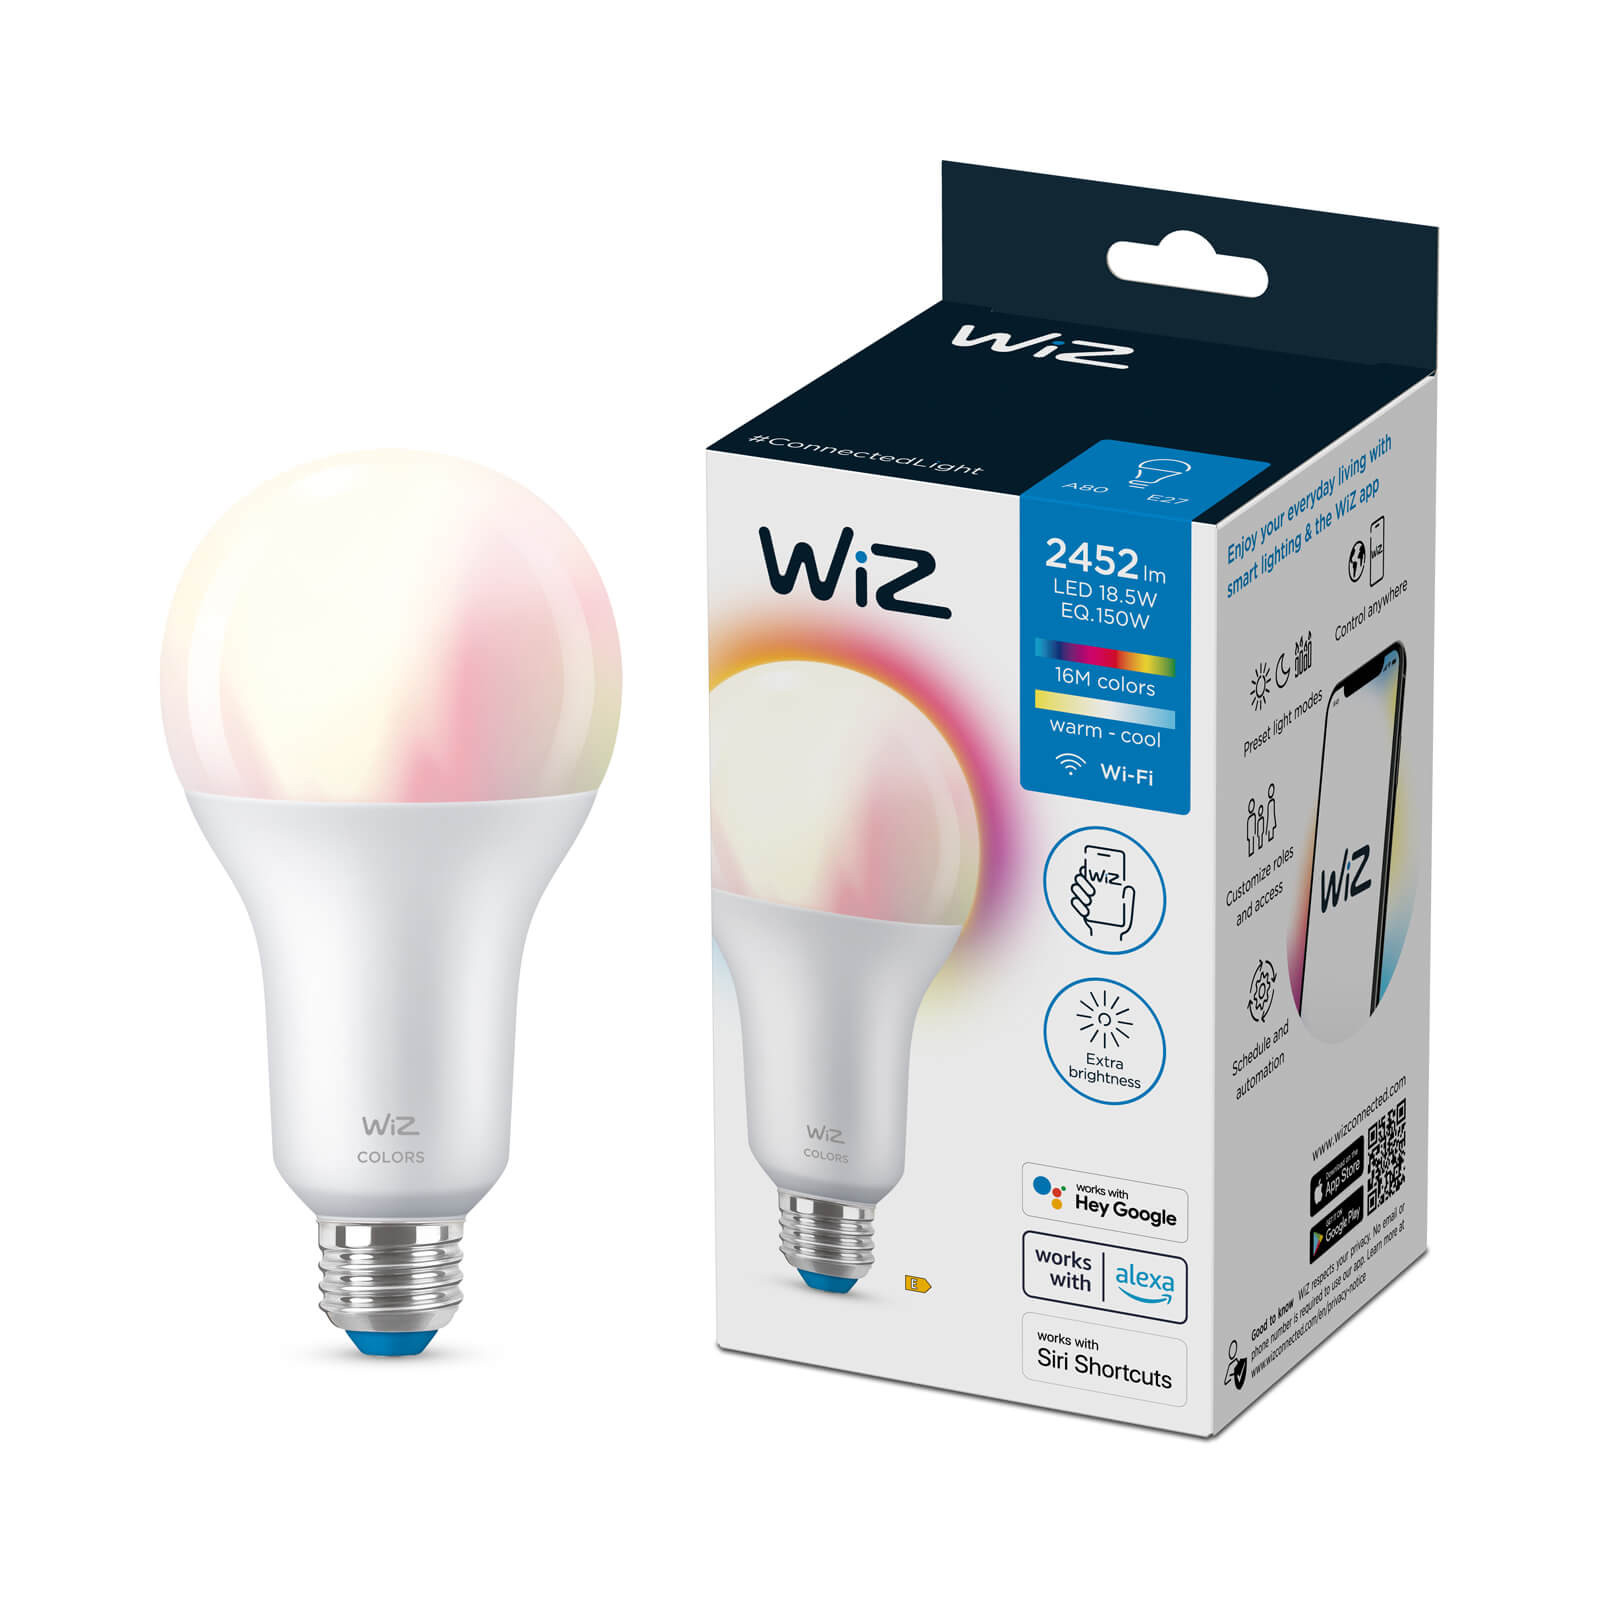 WiZ A80/E27 Lamp Tunable White and Color